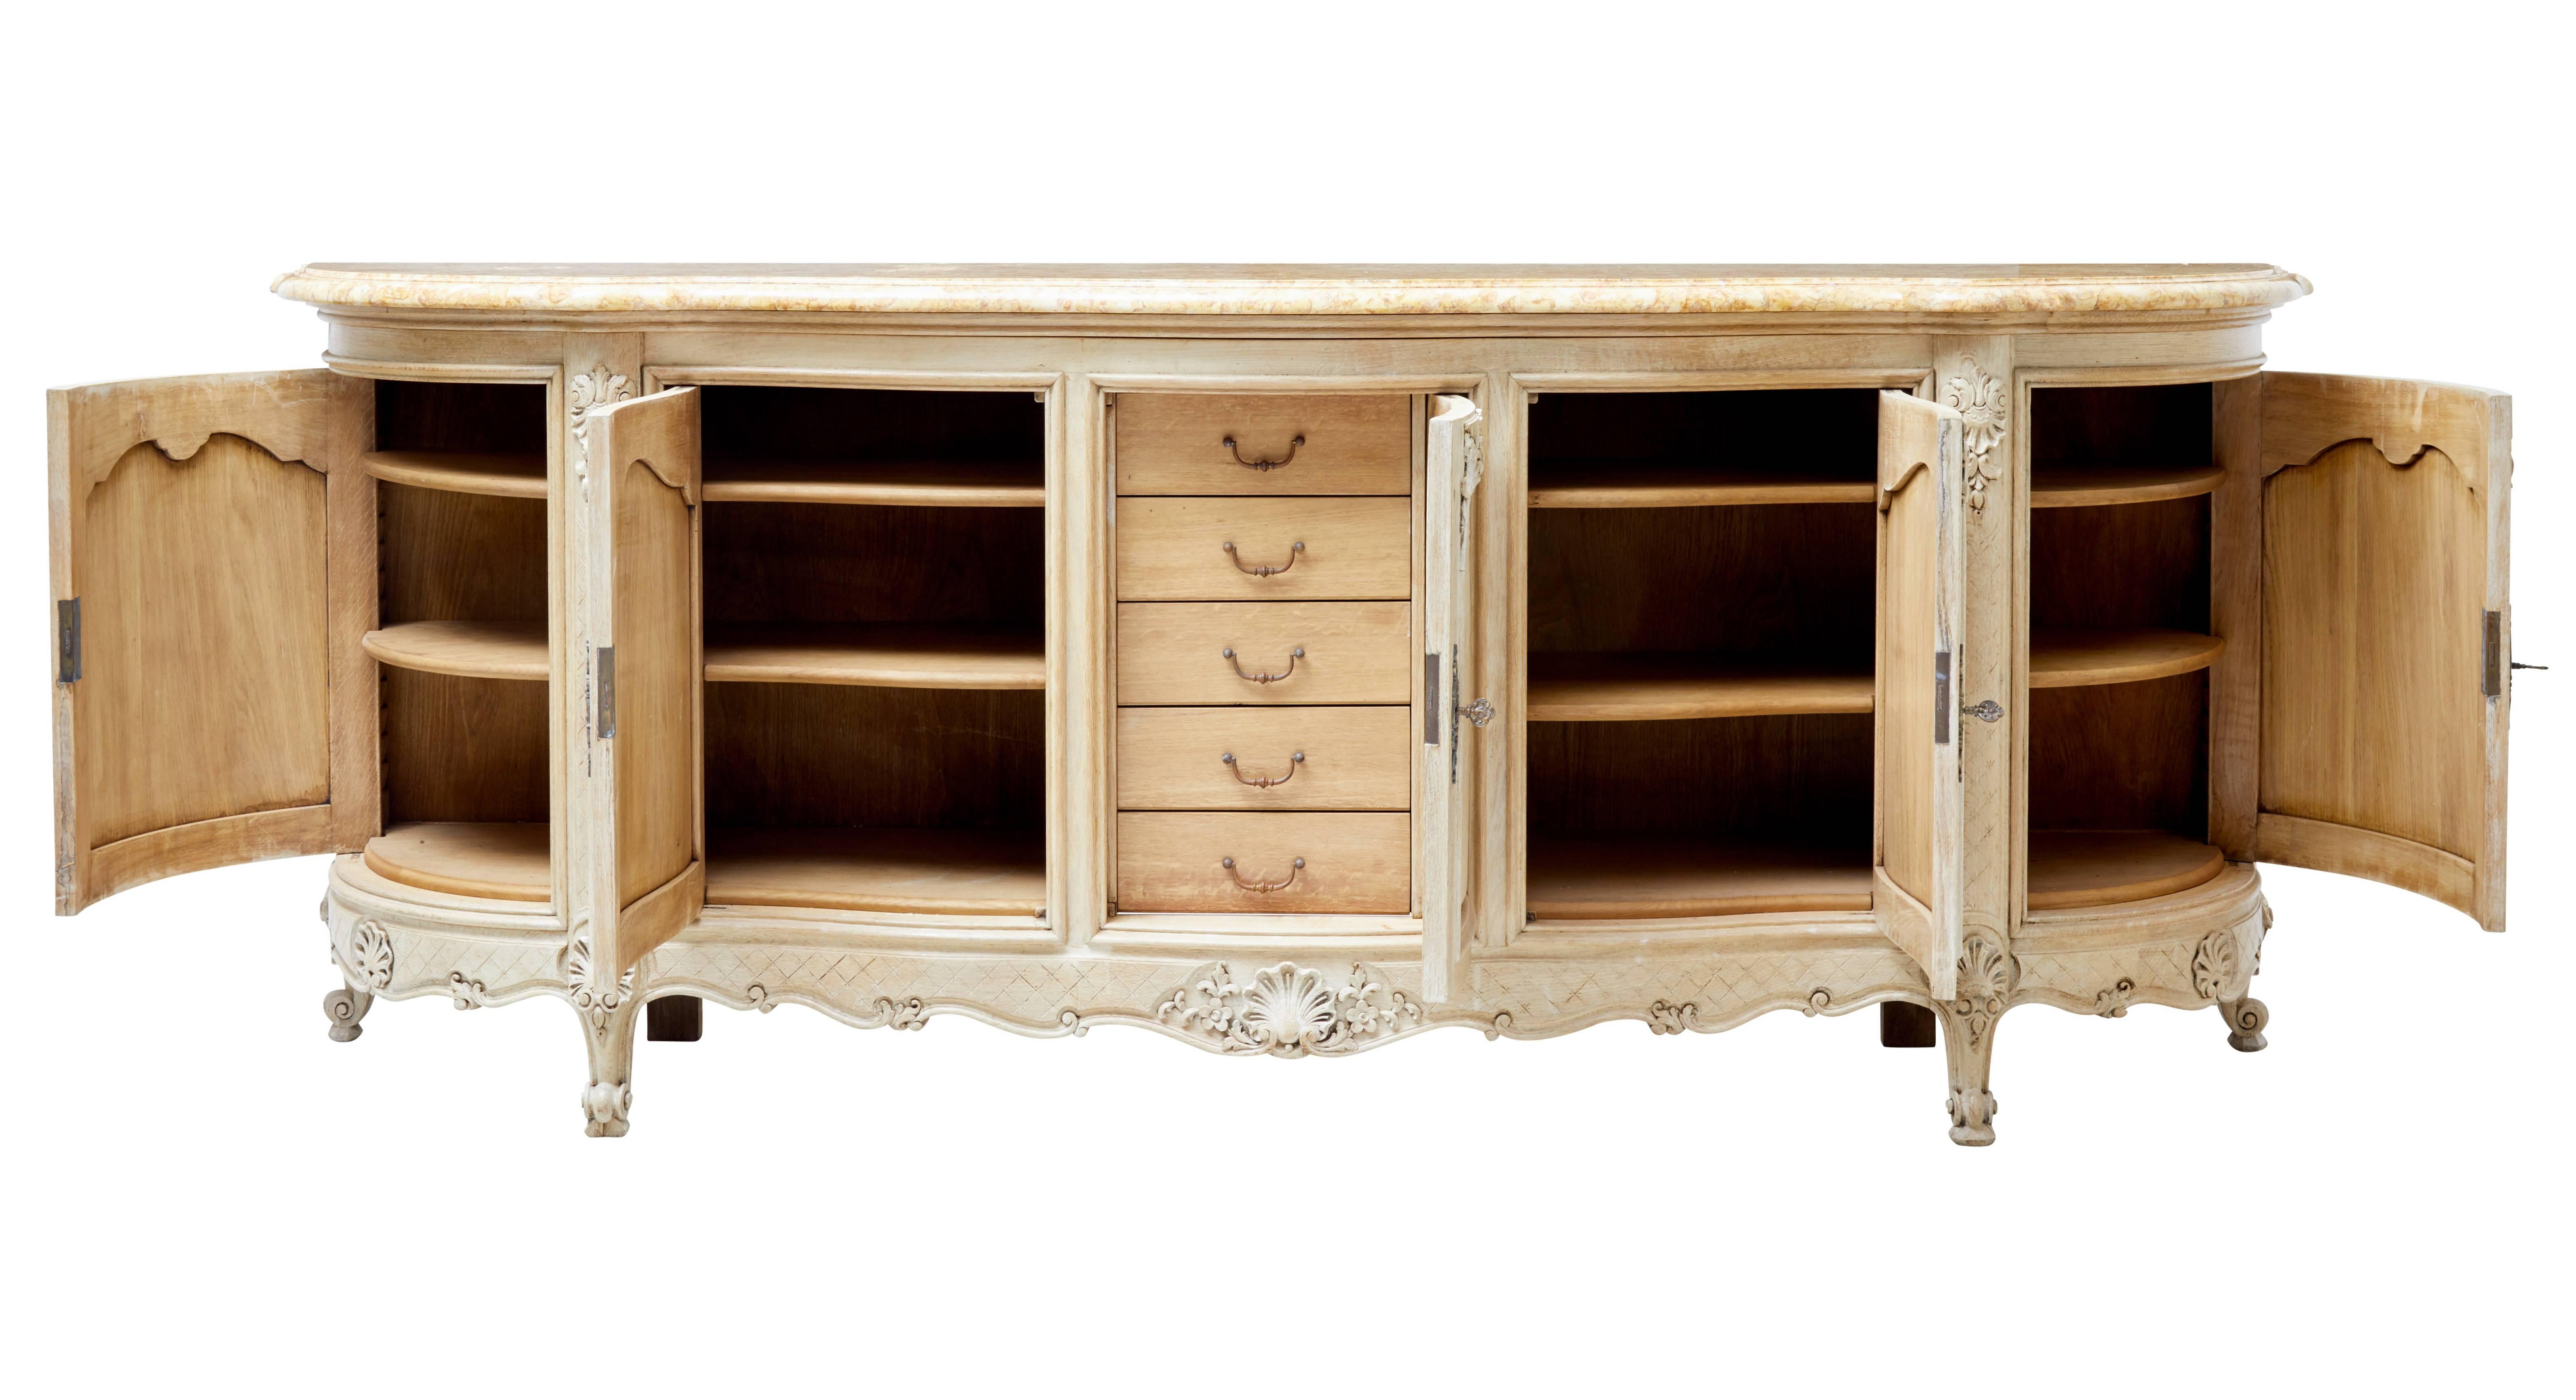 Fine quality serpentine shaped oak sideboard of large proportions.

Presented in a stripped oak finish, with original marble top.

Five doors to the front, middle door opening to reveal a fitted interior of five drawers, flanked either side by